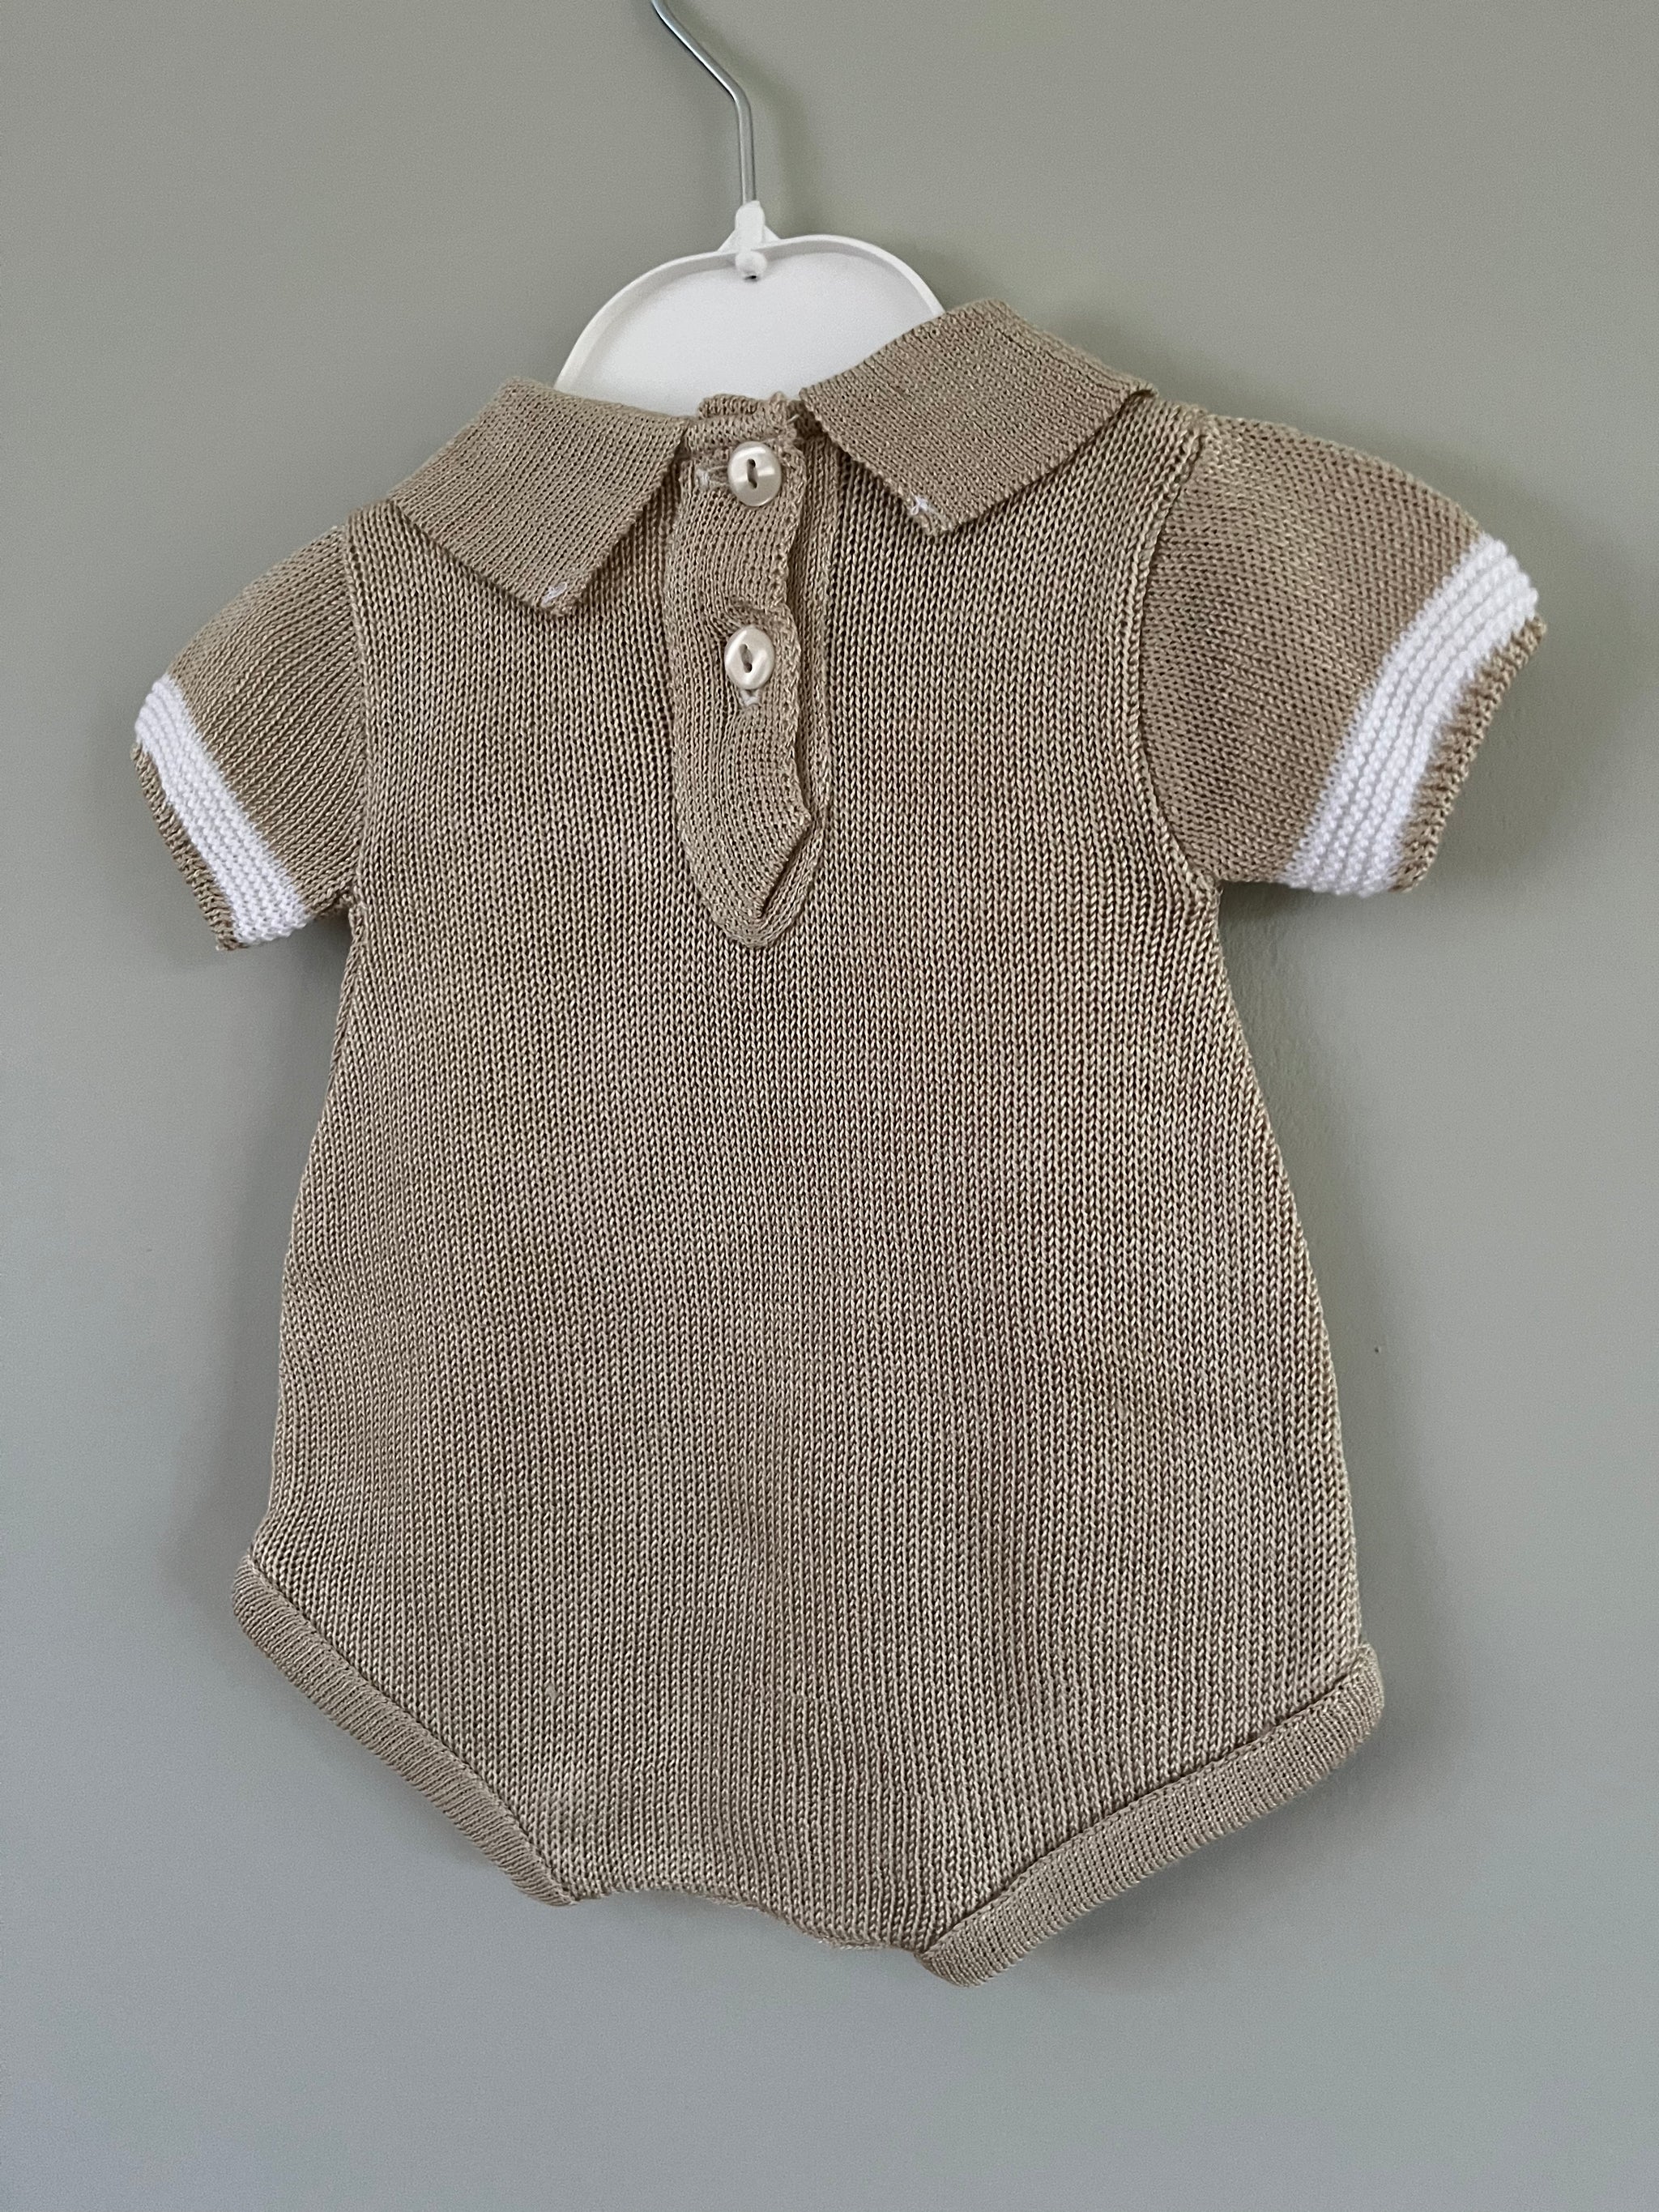 Baby Beige Knitted Romper Outfit Little Nosh SALE